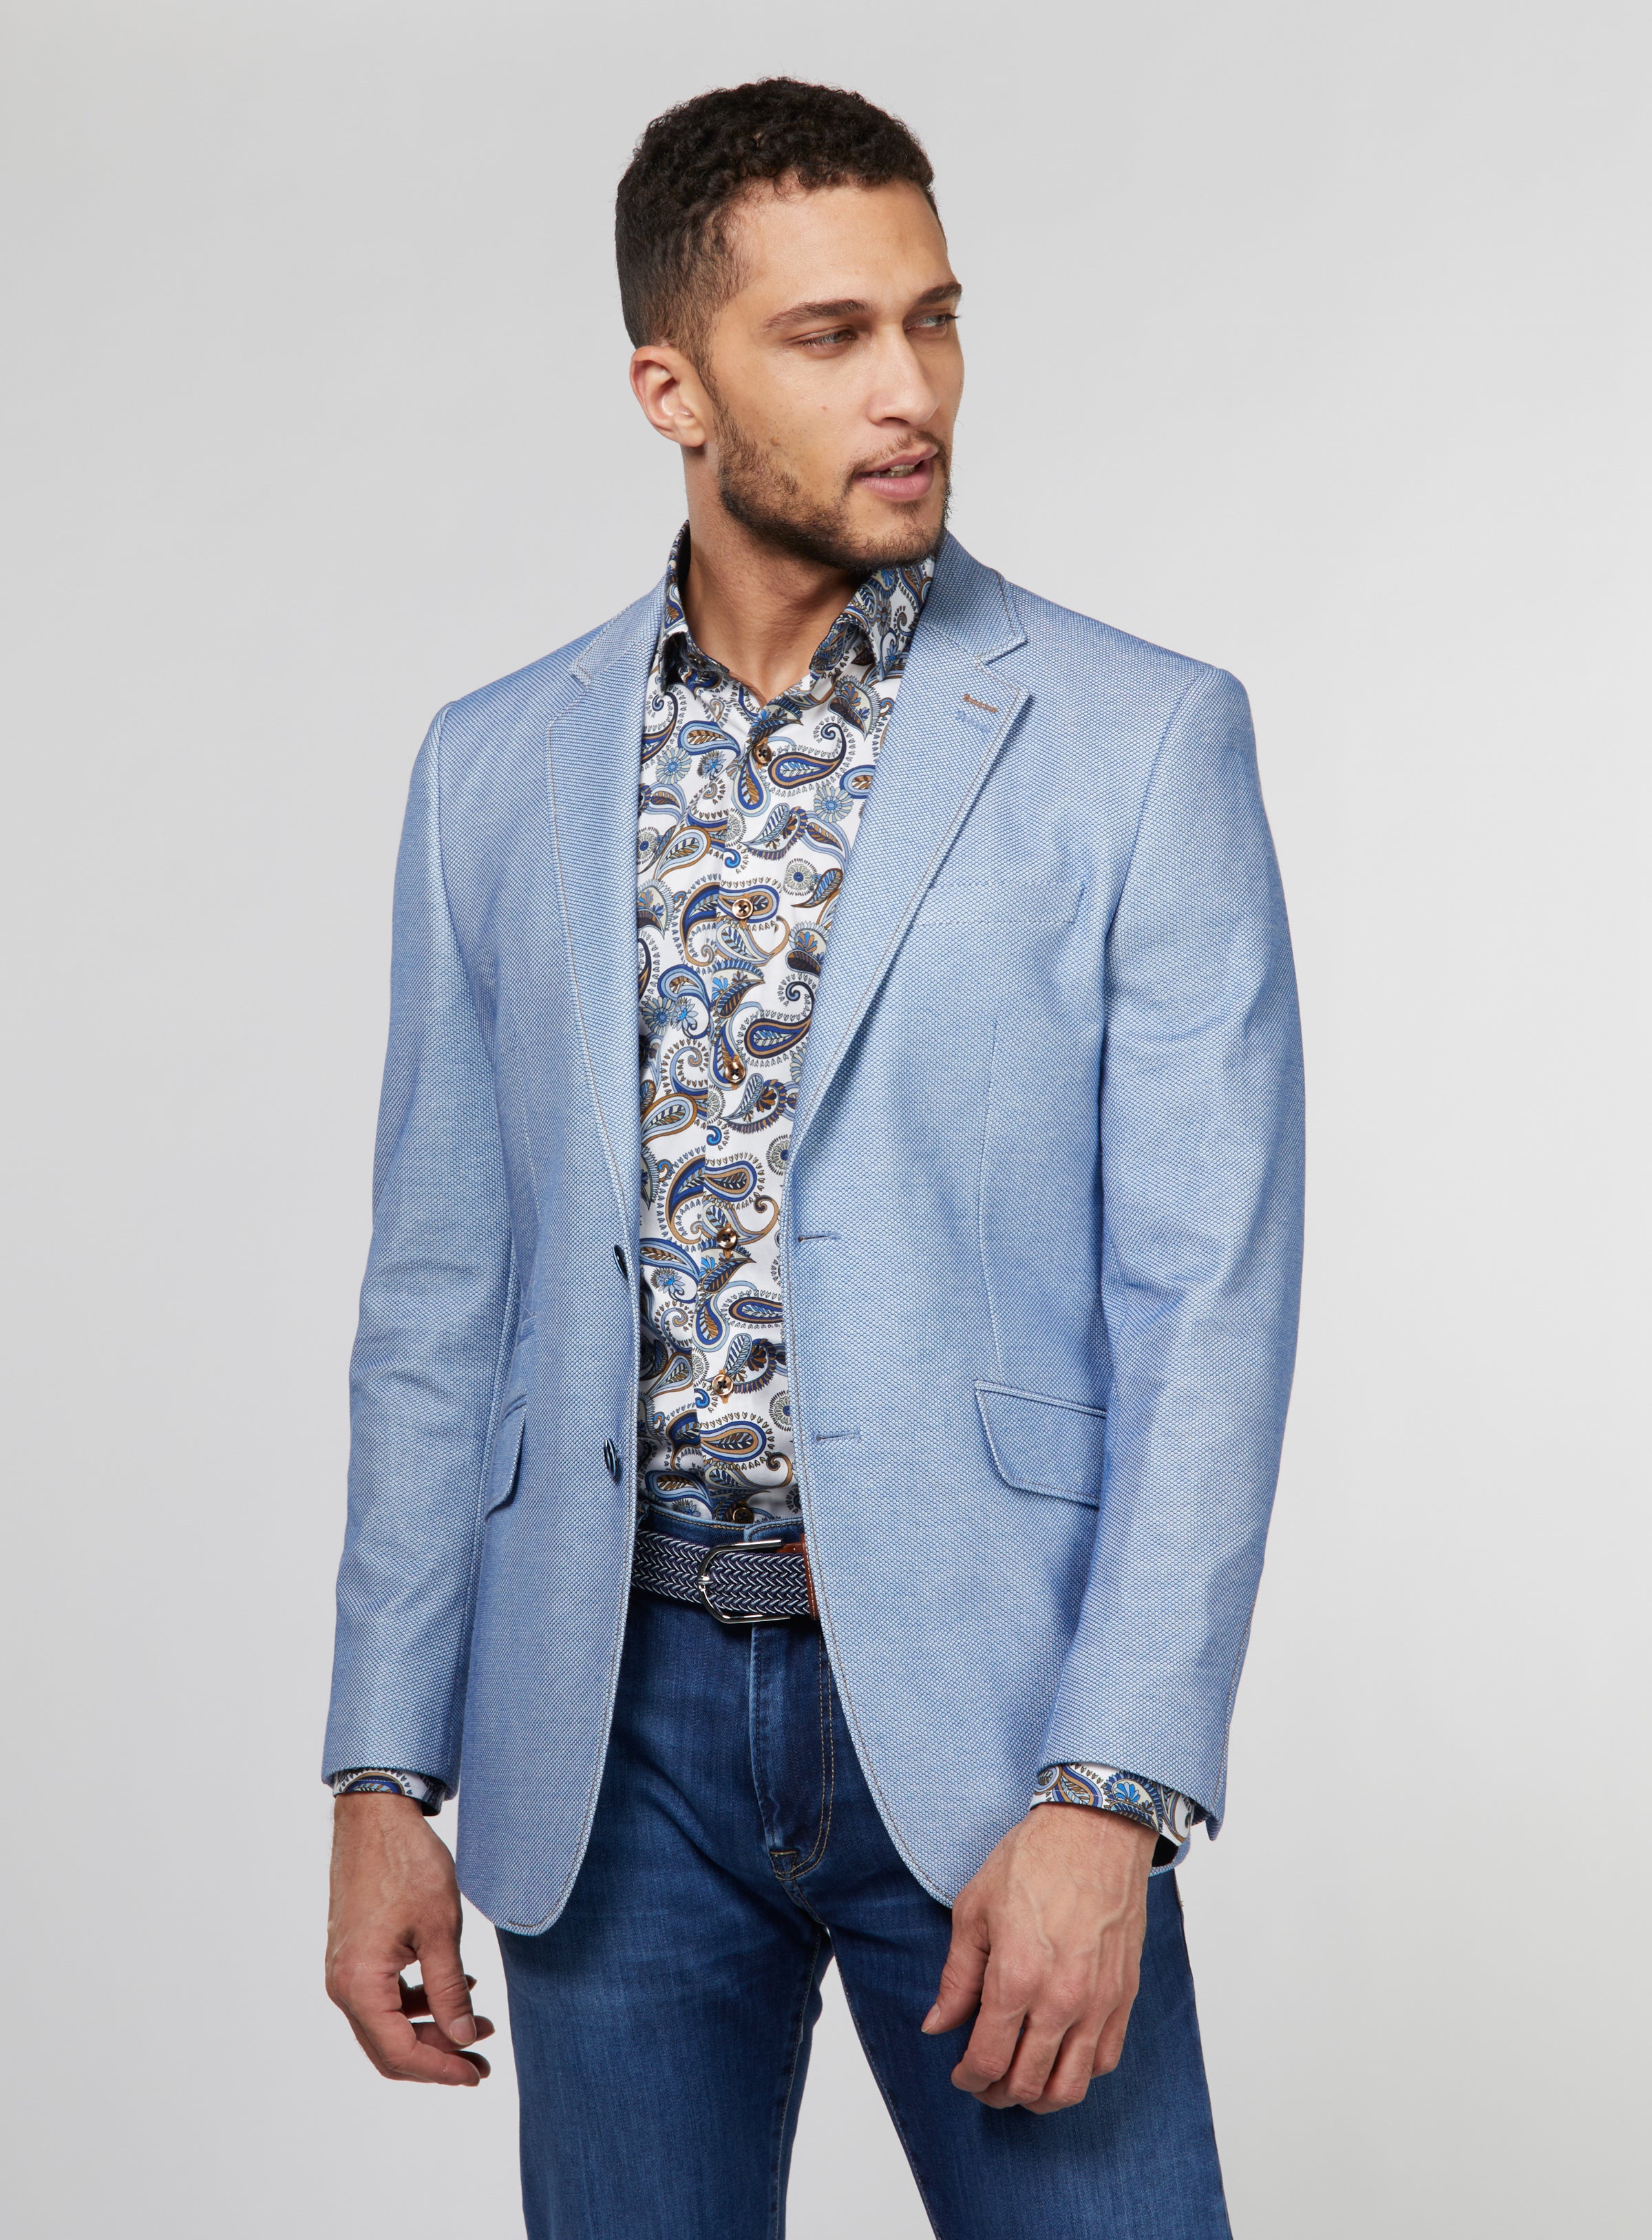 Men's Casual and Sport Jackets - Ernest